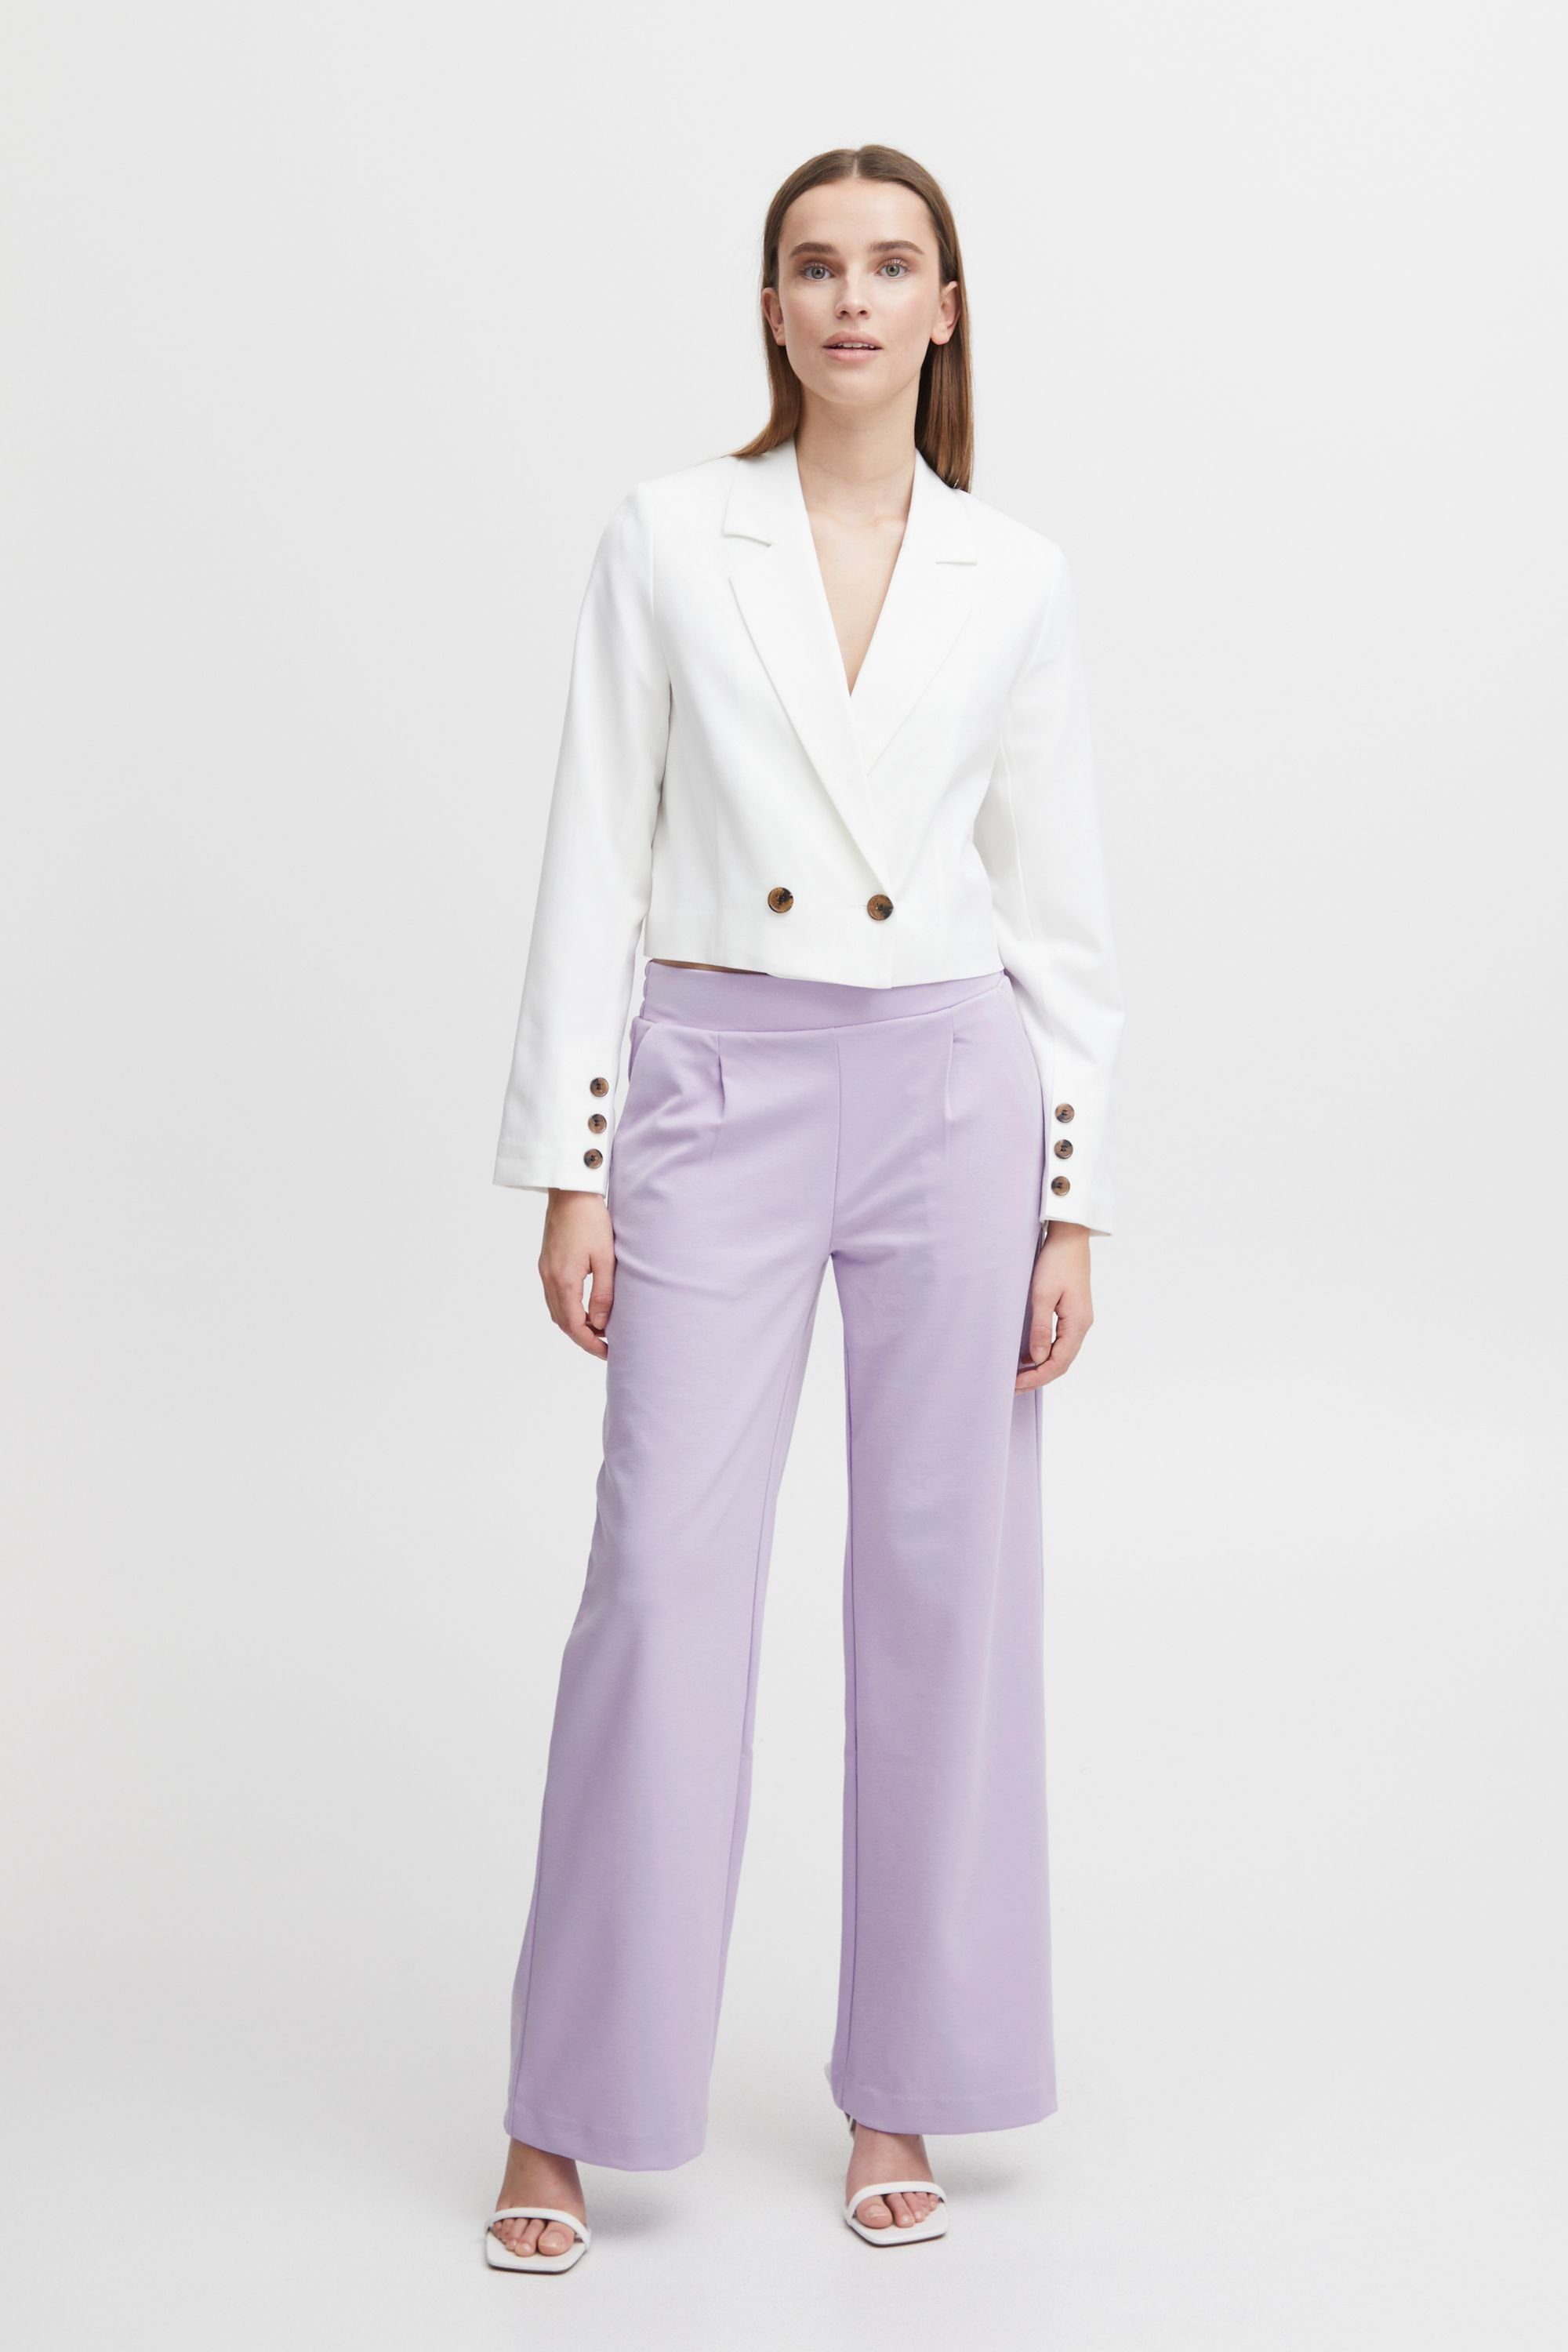 (153716) WIDE BYRIZETTA Rose Purple b.young - 2 2 PANTS 20812847 Stoffhose